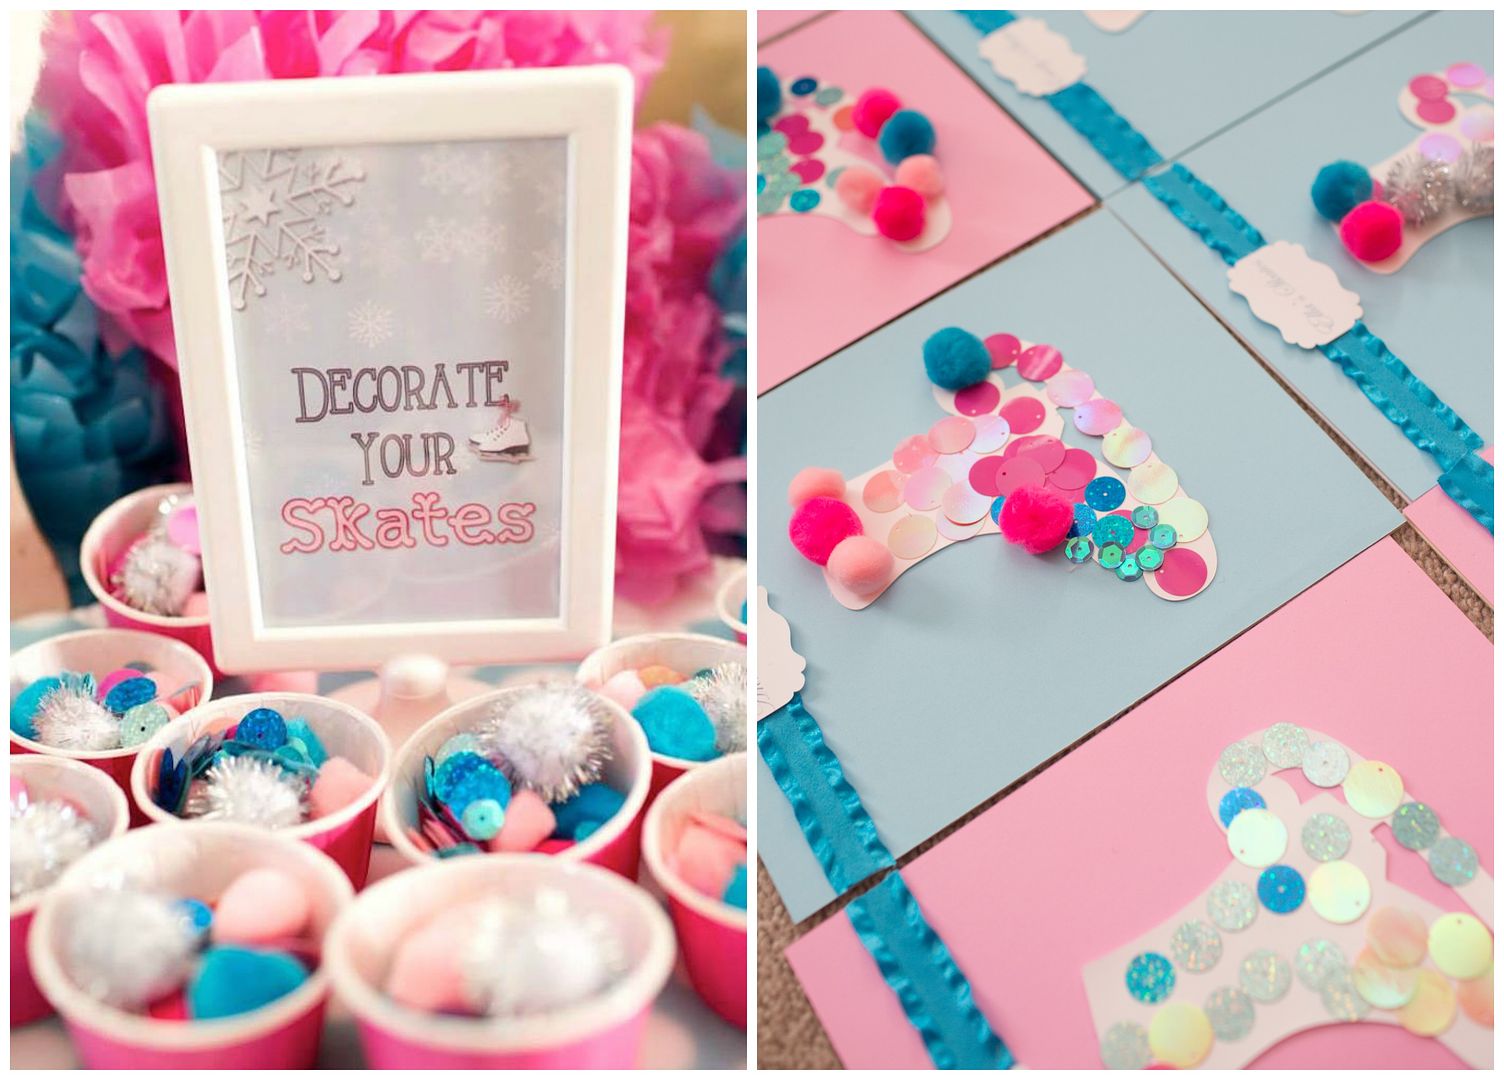 Winter birthday party themes: skate decorating activity by Charming Touch Parties